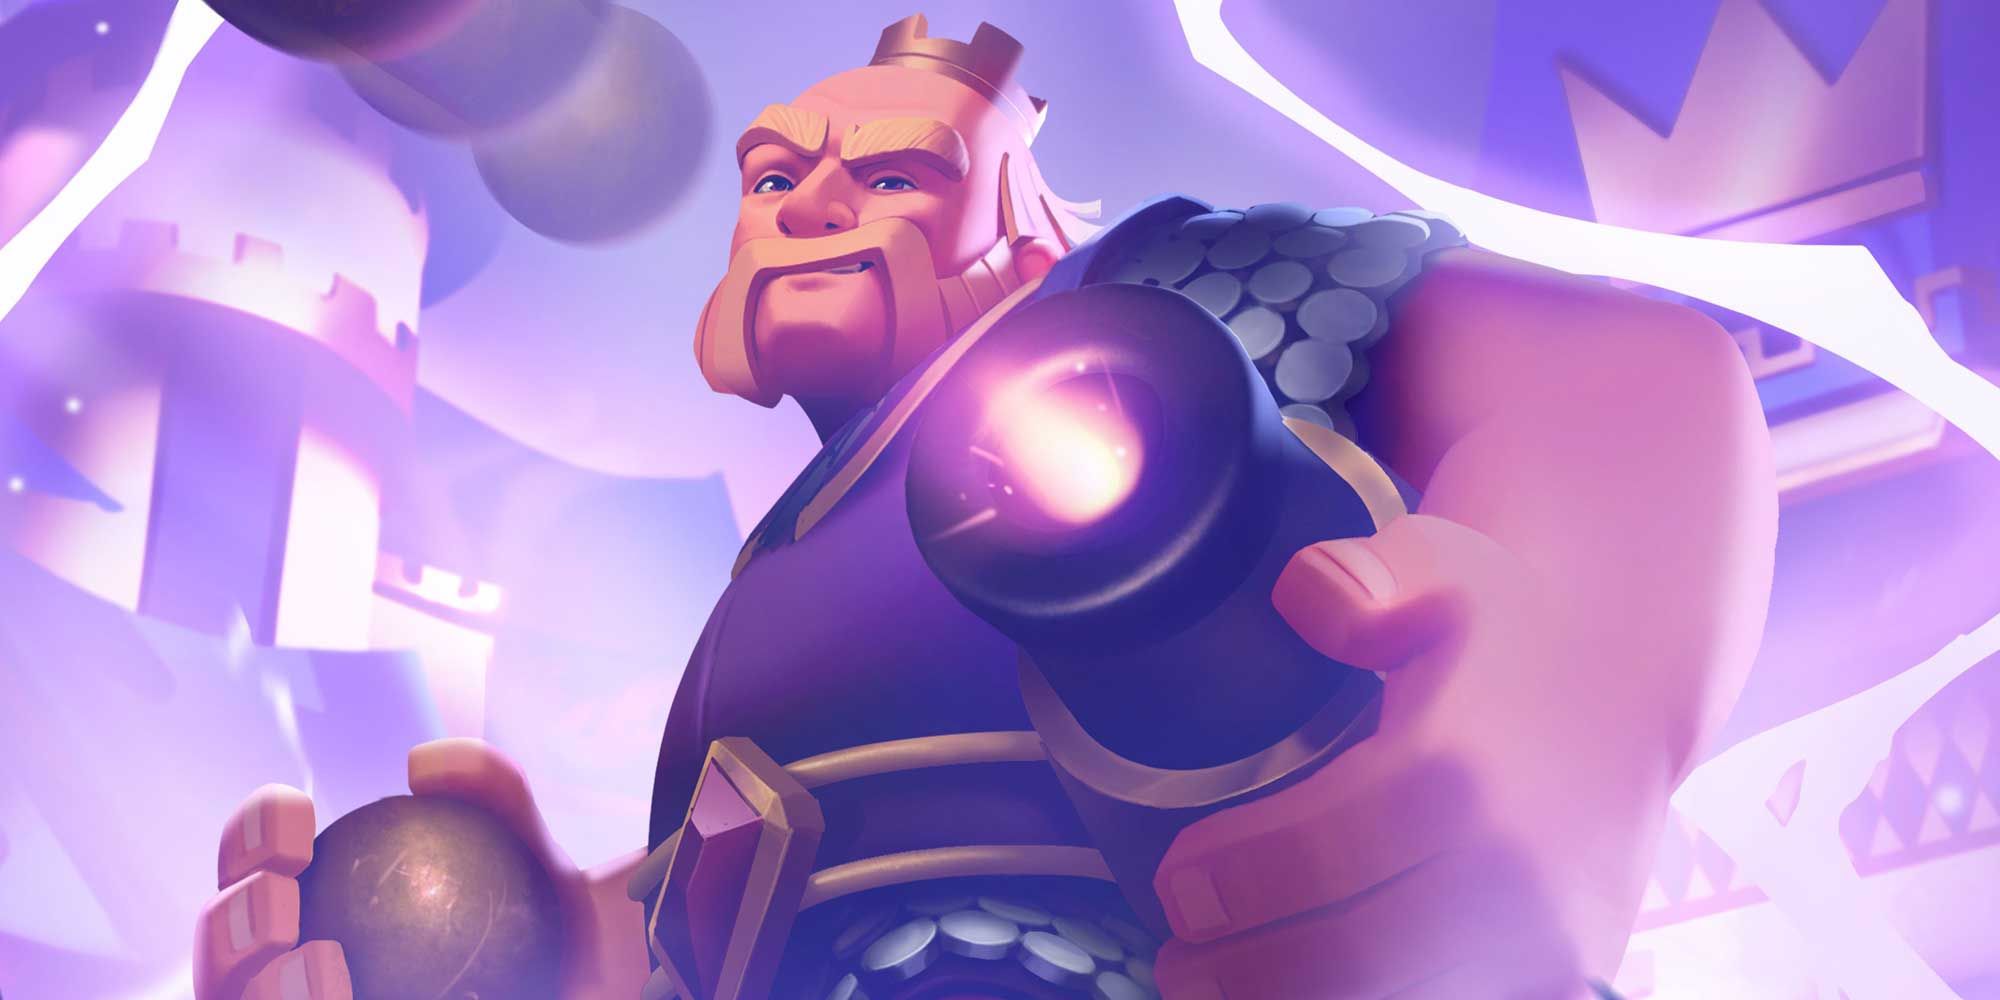 Clash-Royale-Best-Card-Evolutions-To-Unlock-First--Royal-Giant